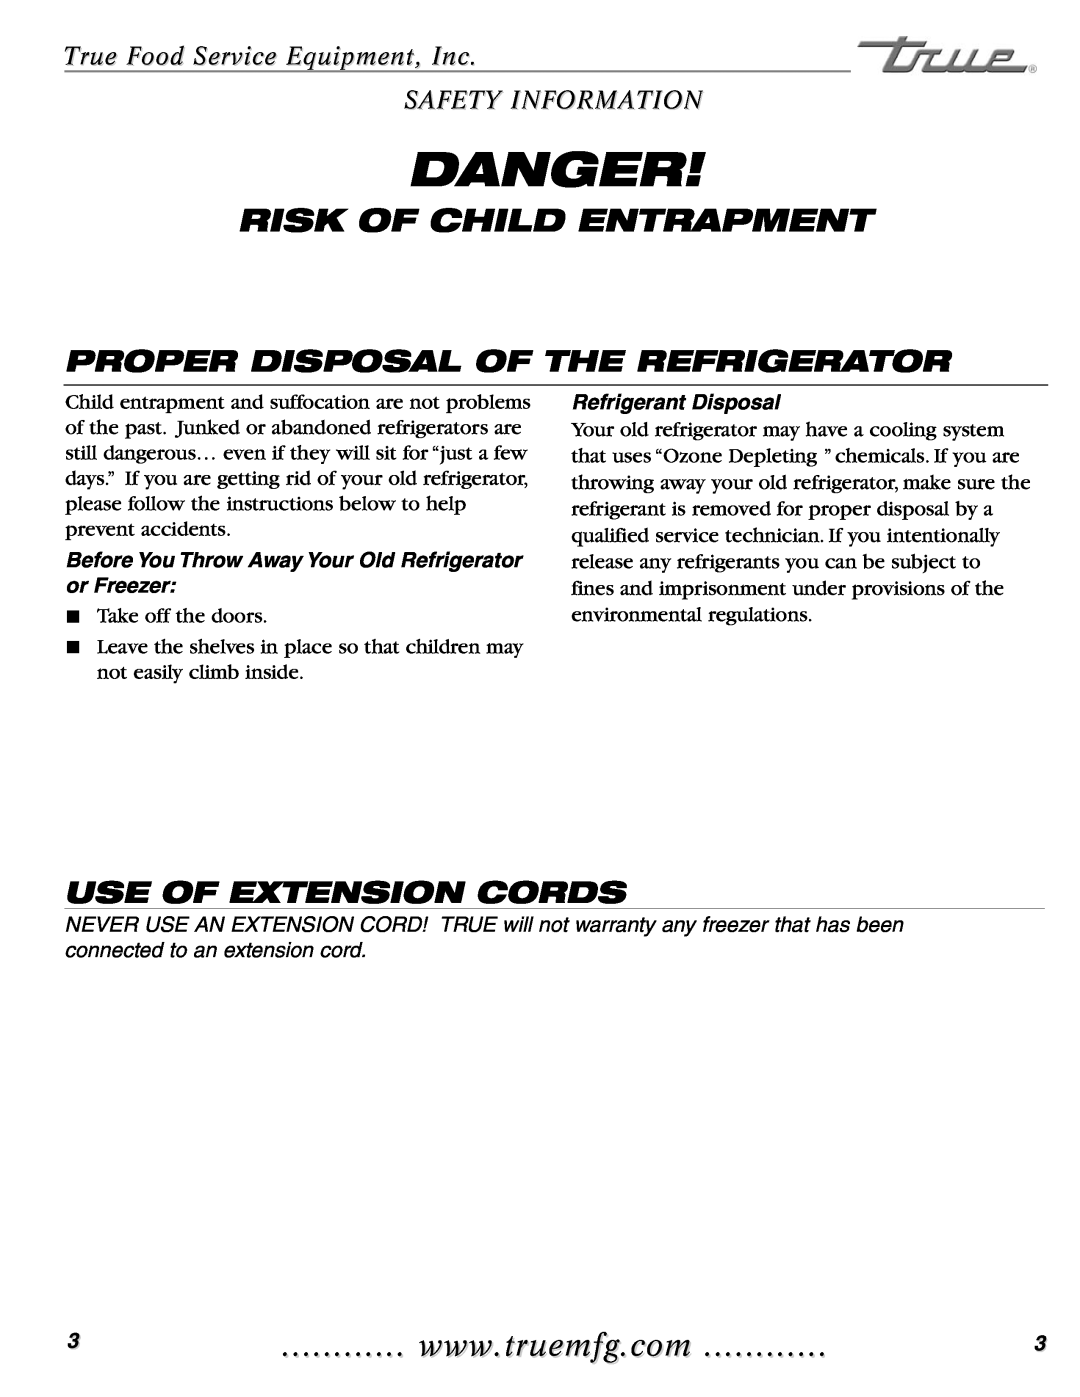 True Manufacturing Company GDIM-26 Risk Of Child Entrapment, Proper Disposal Of The Refrigerator, Use Of Extension Cords 